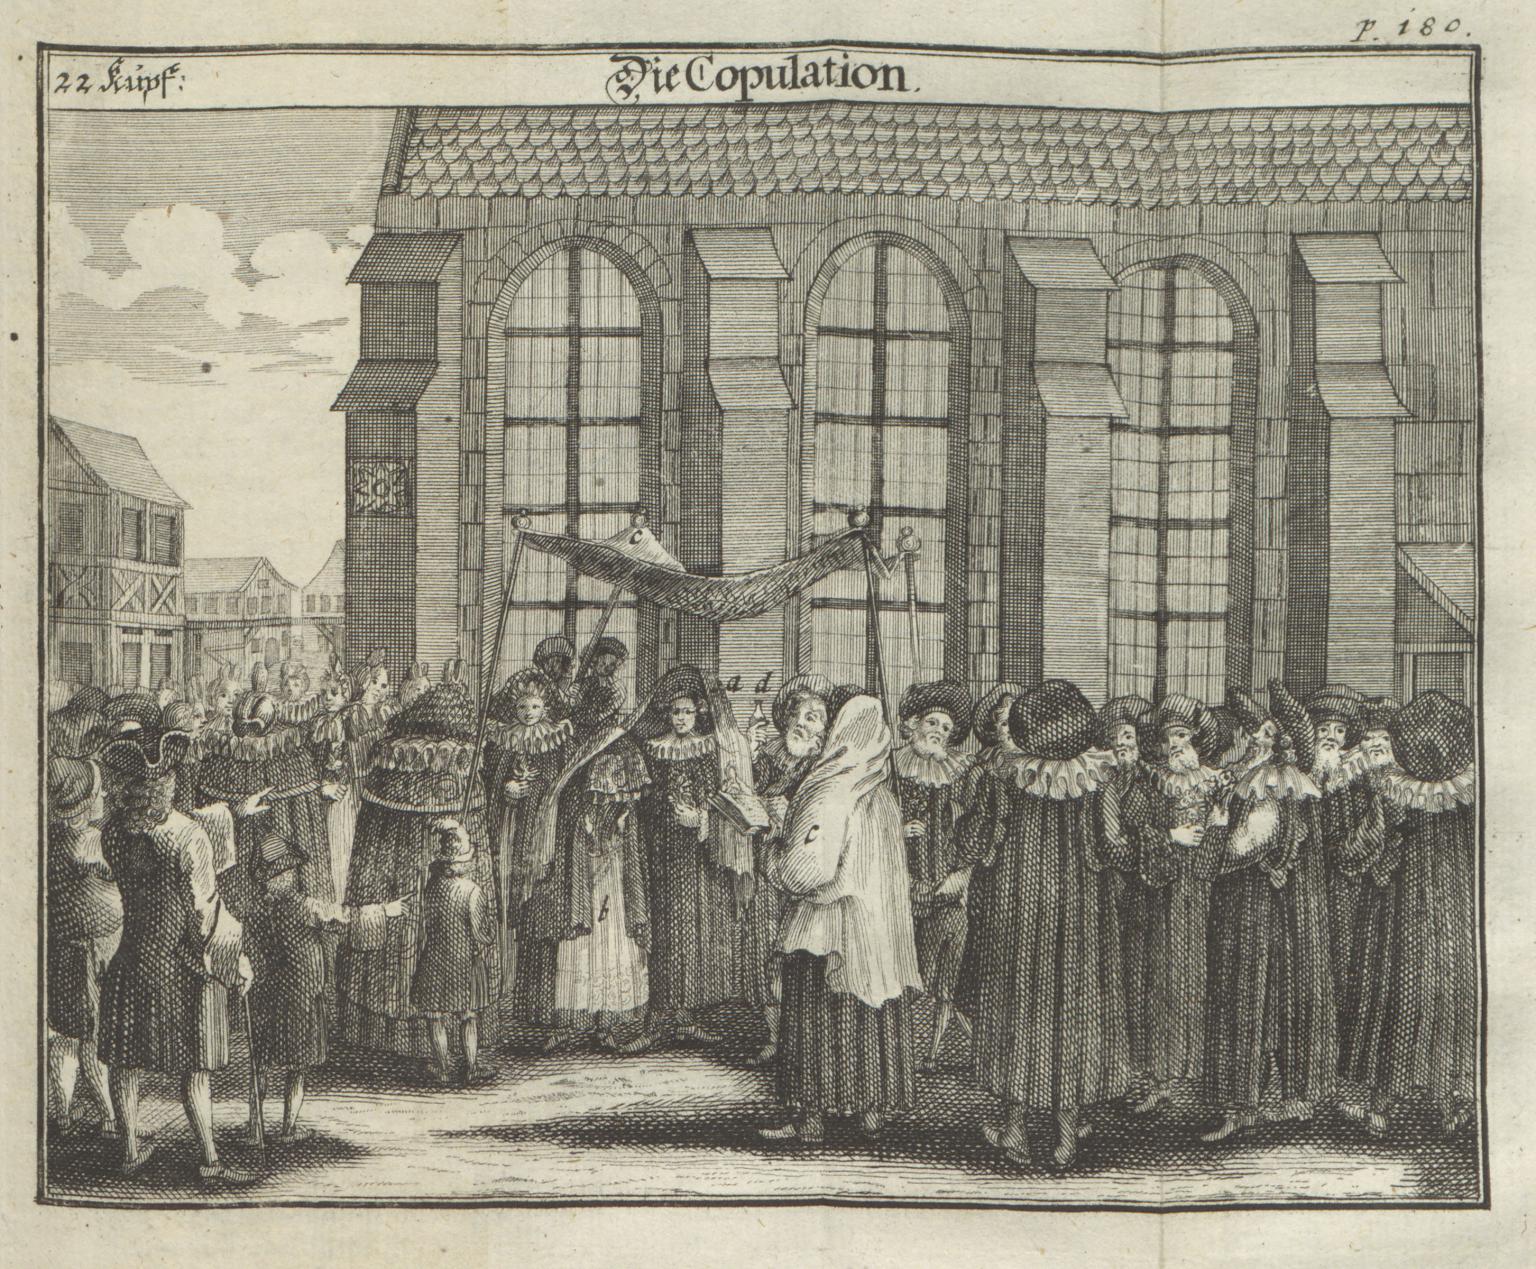 Print engraving of crowd of people outside of building gathered around couple under wedding canopy.